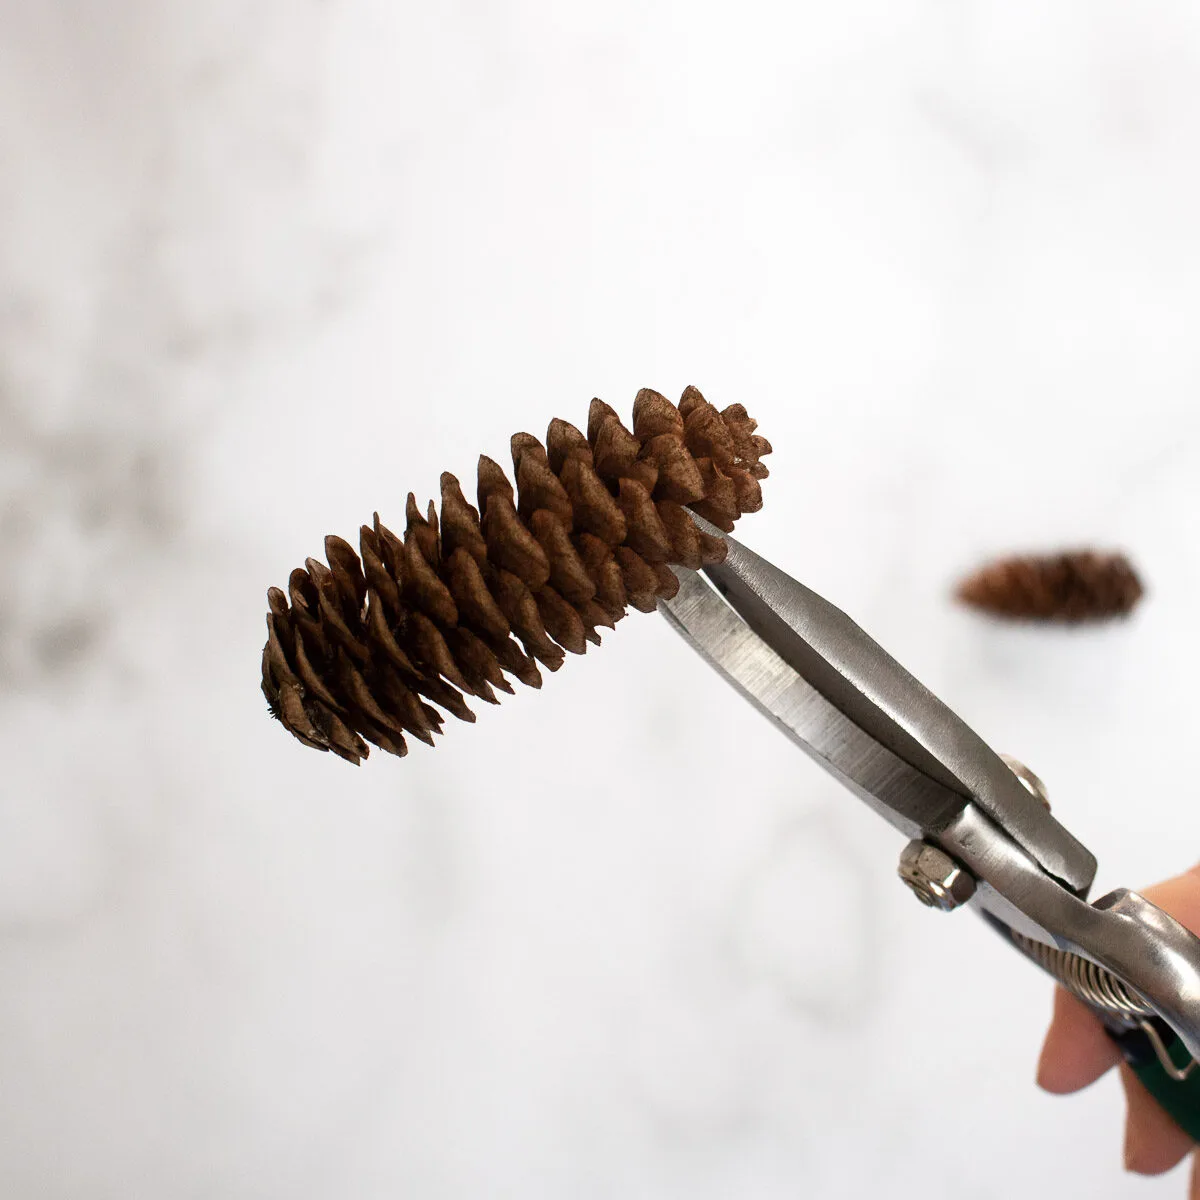 Cutting a pinecone with garden snips.